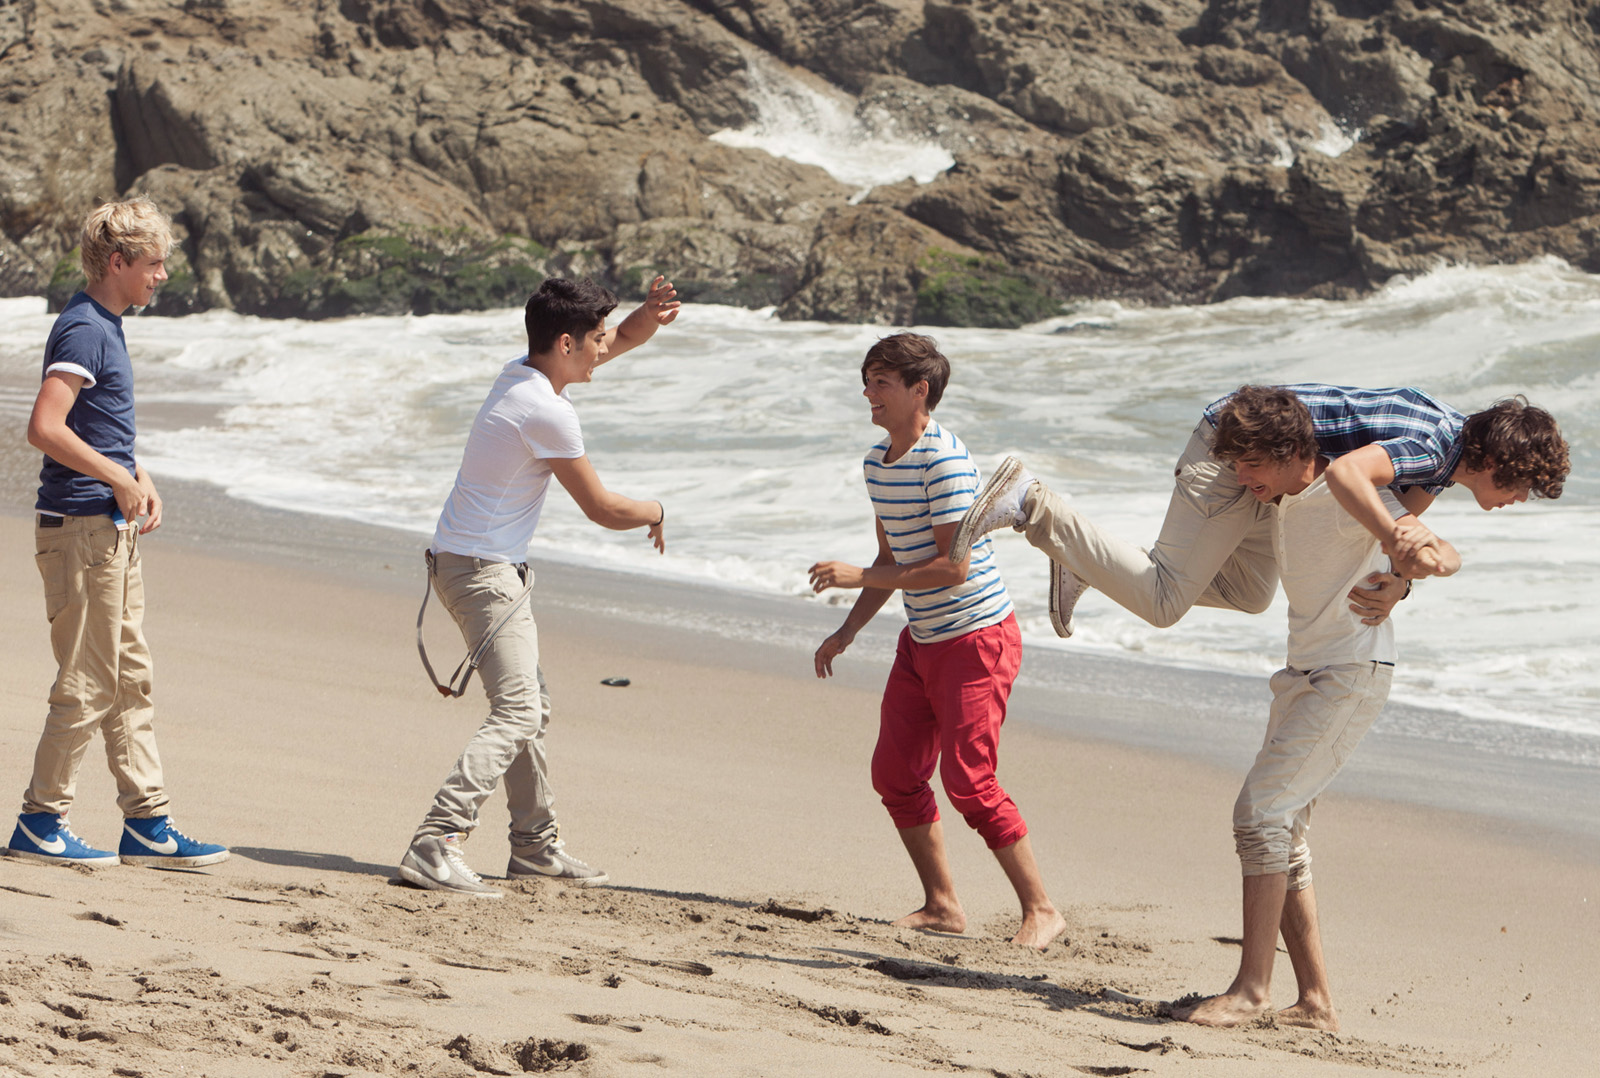 Liam Payne in Music Video: What Makes You Beautiful